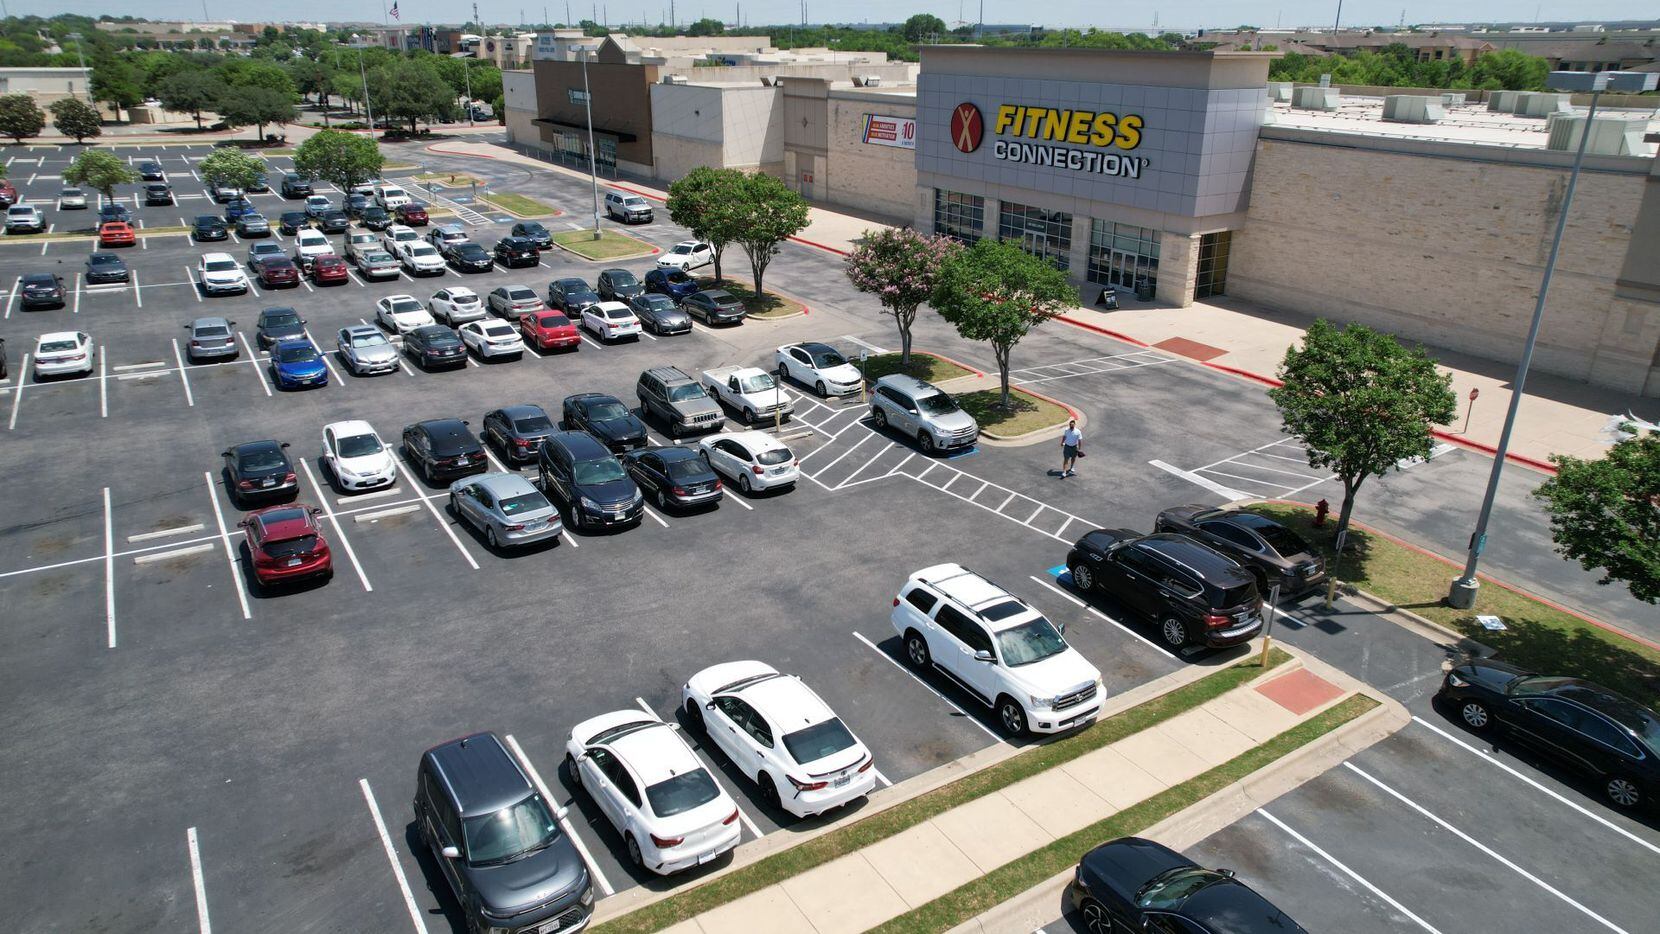 RD Management and JMF Properties own the Shops at Tech Ridge shopping center in Austin.